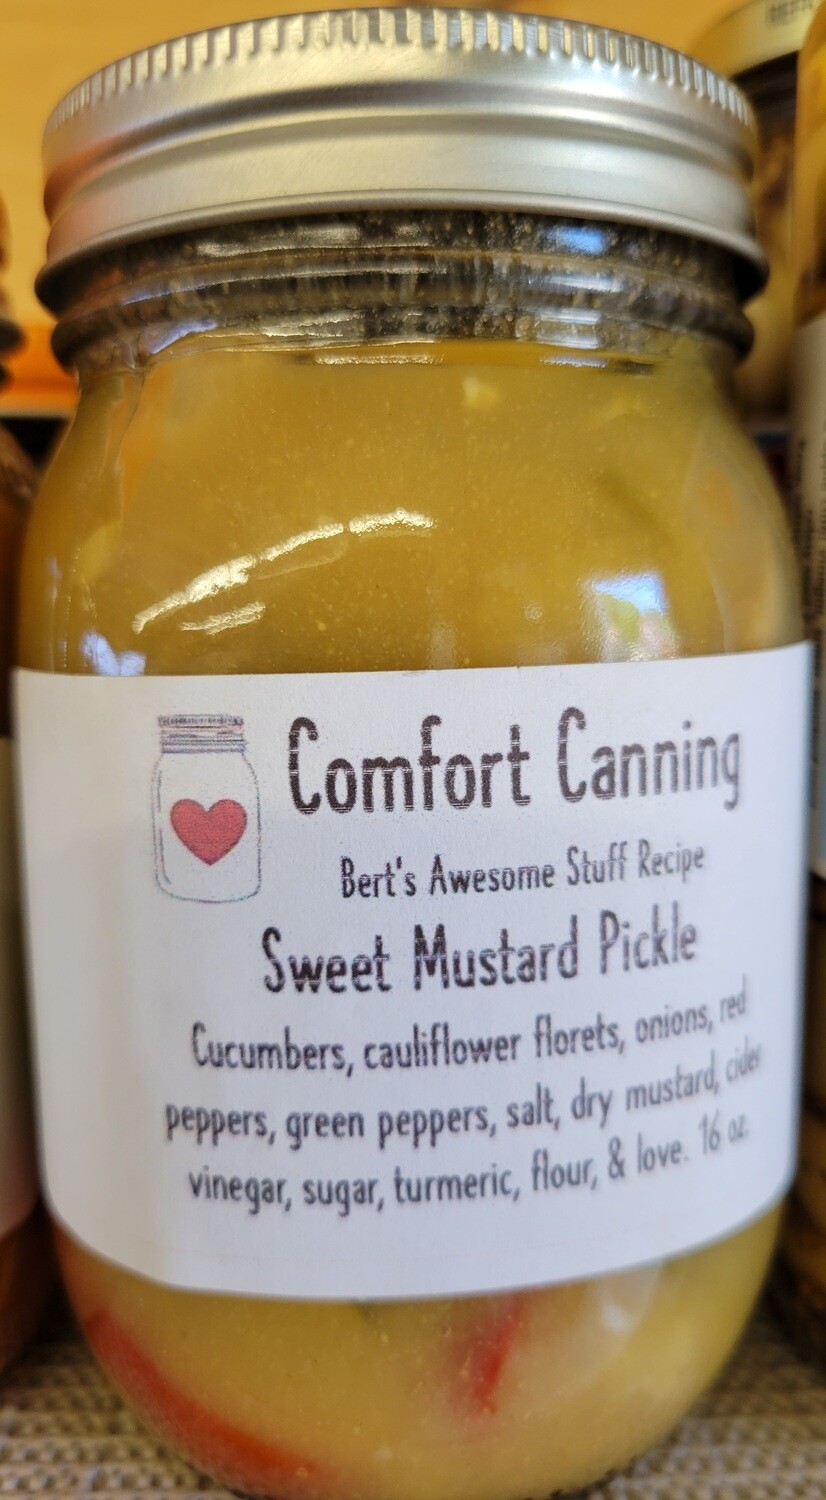 Comfort Canning - Sweet Mustard Pickles